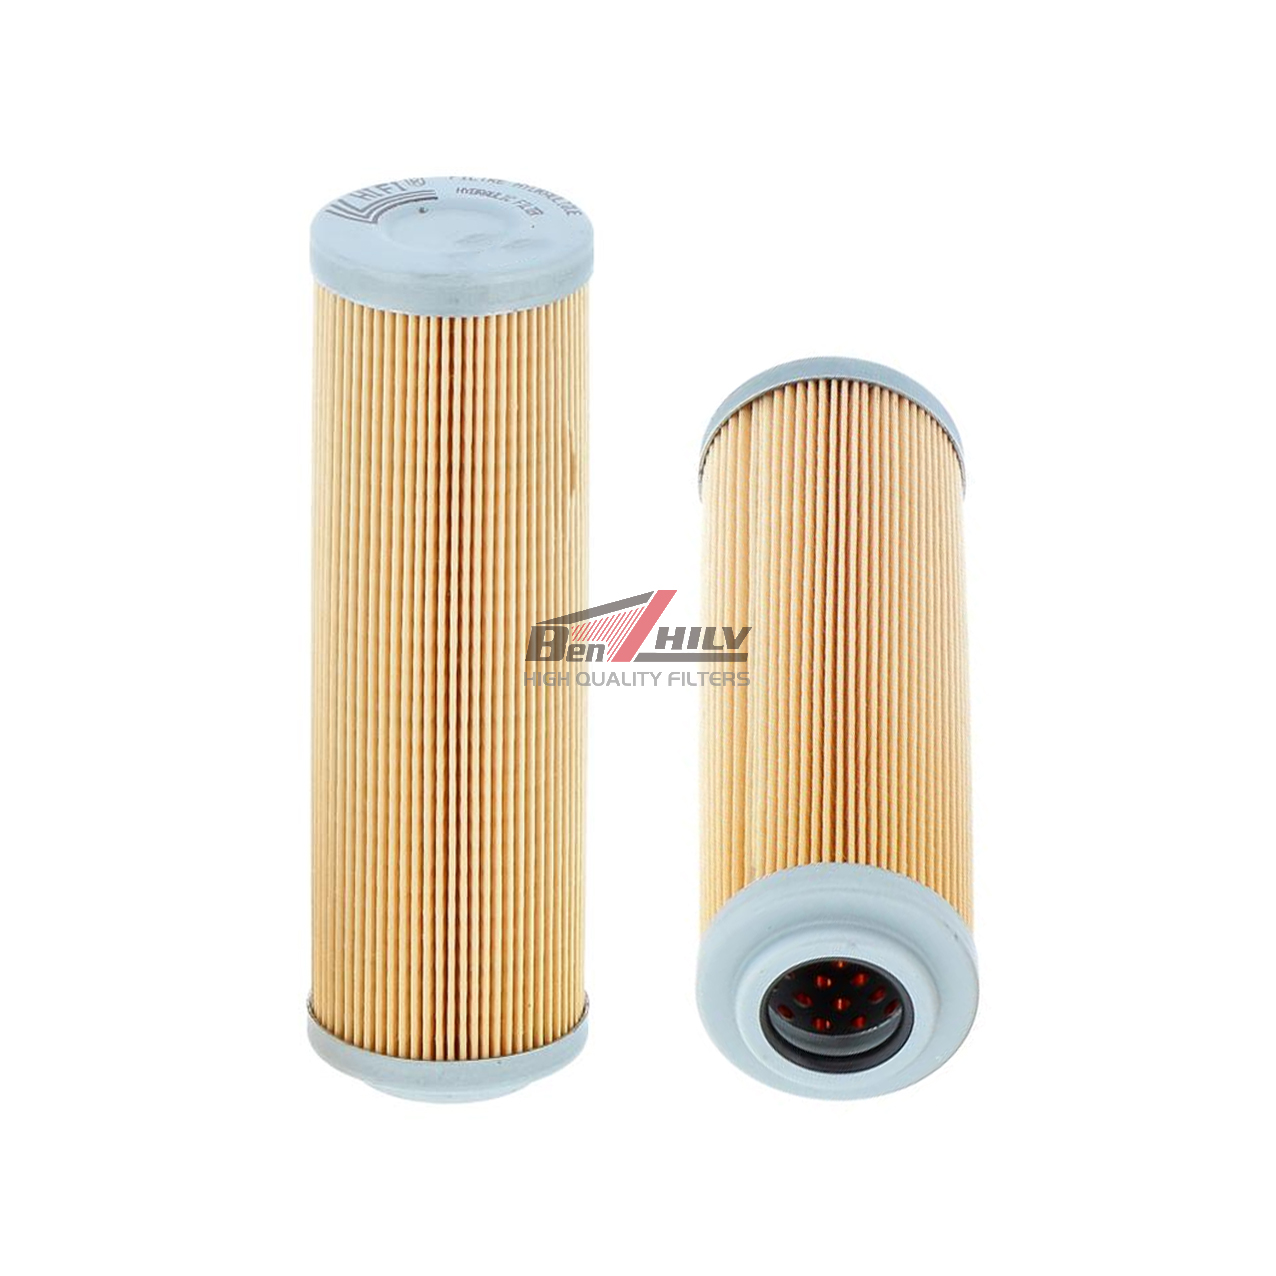 K1022654 2474-9042S 474-00009 471-00061 for DOOSAN FORESTRY MACHINE part Hydraulic filter Element